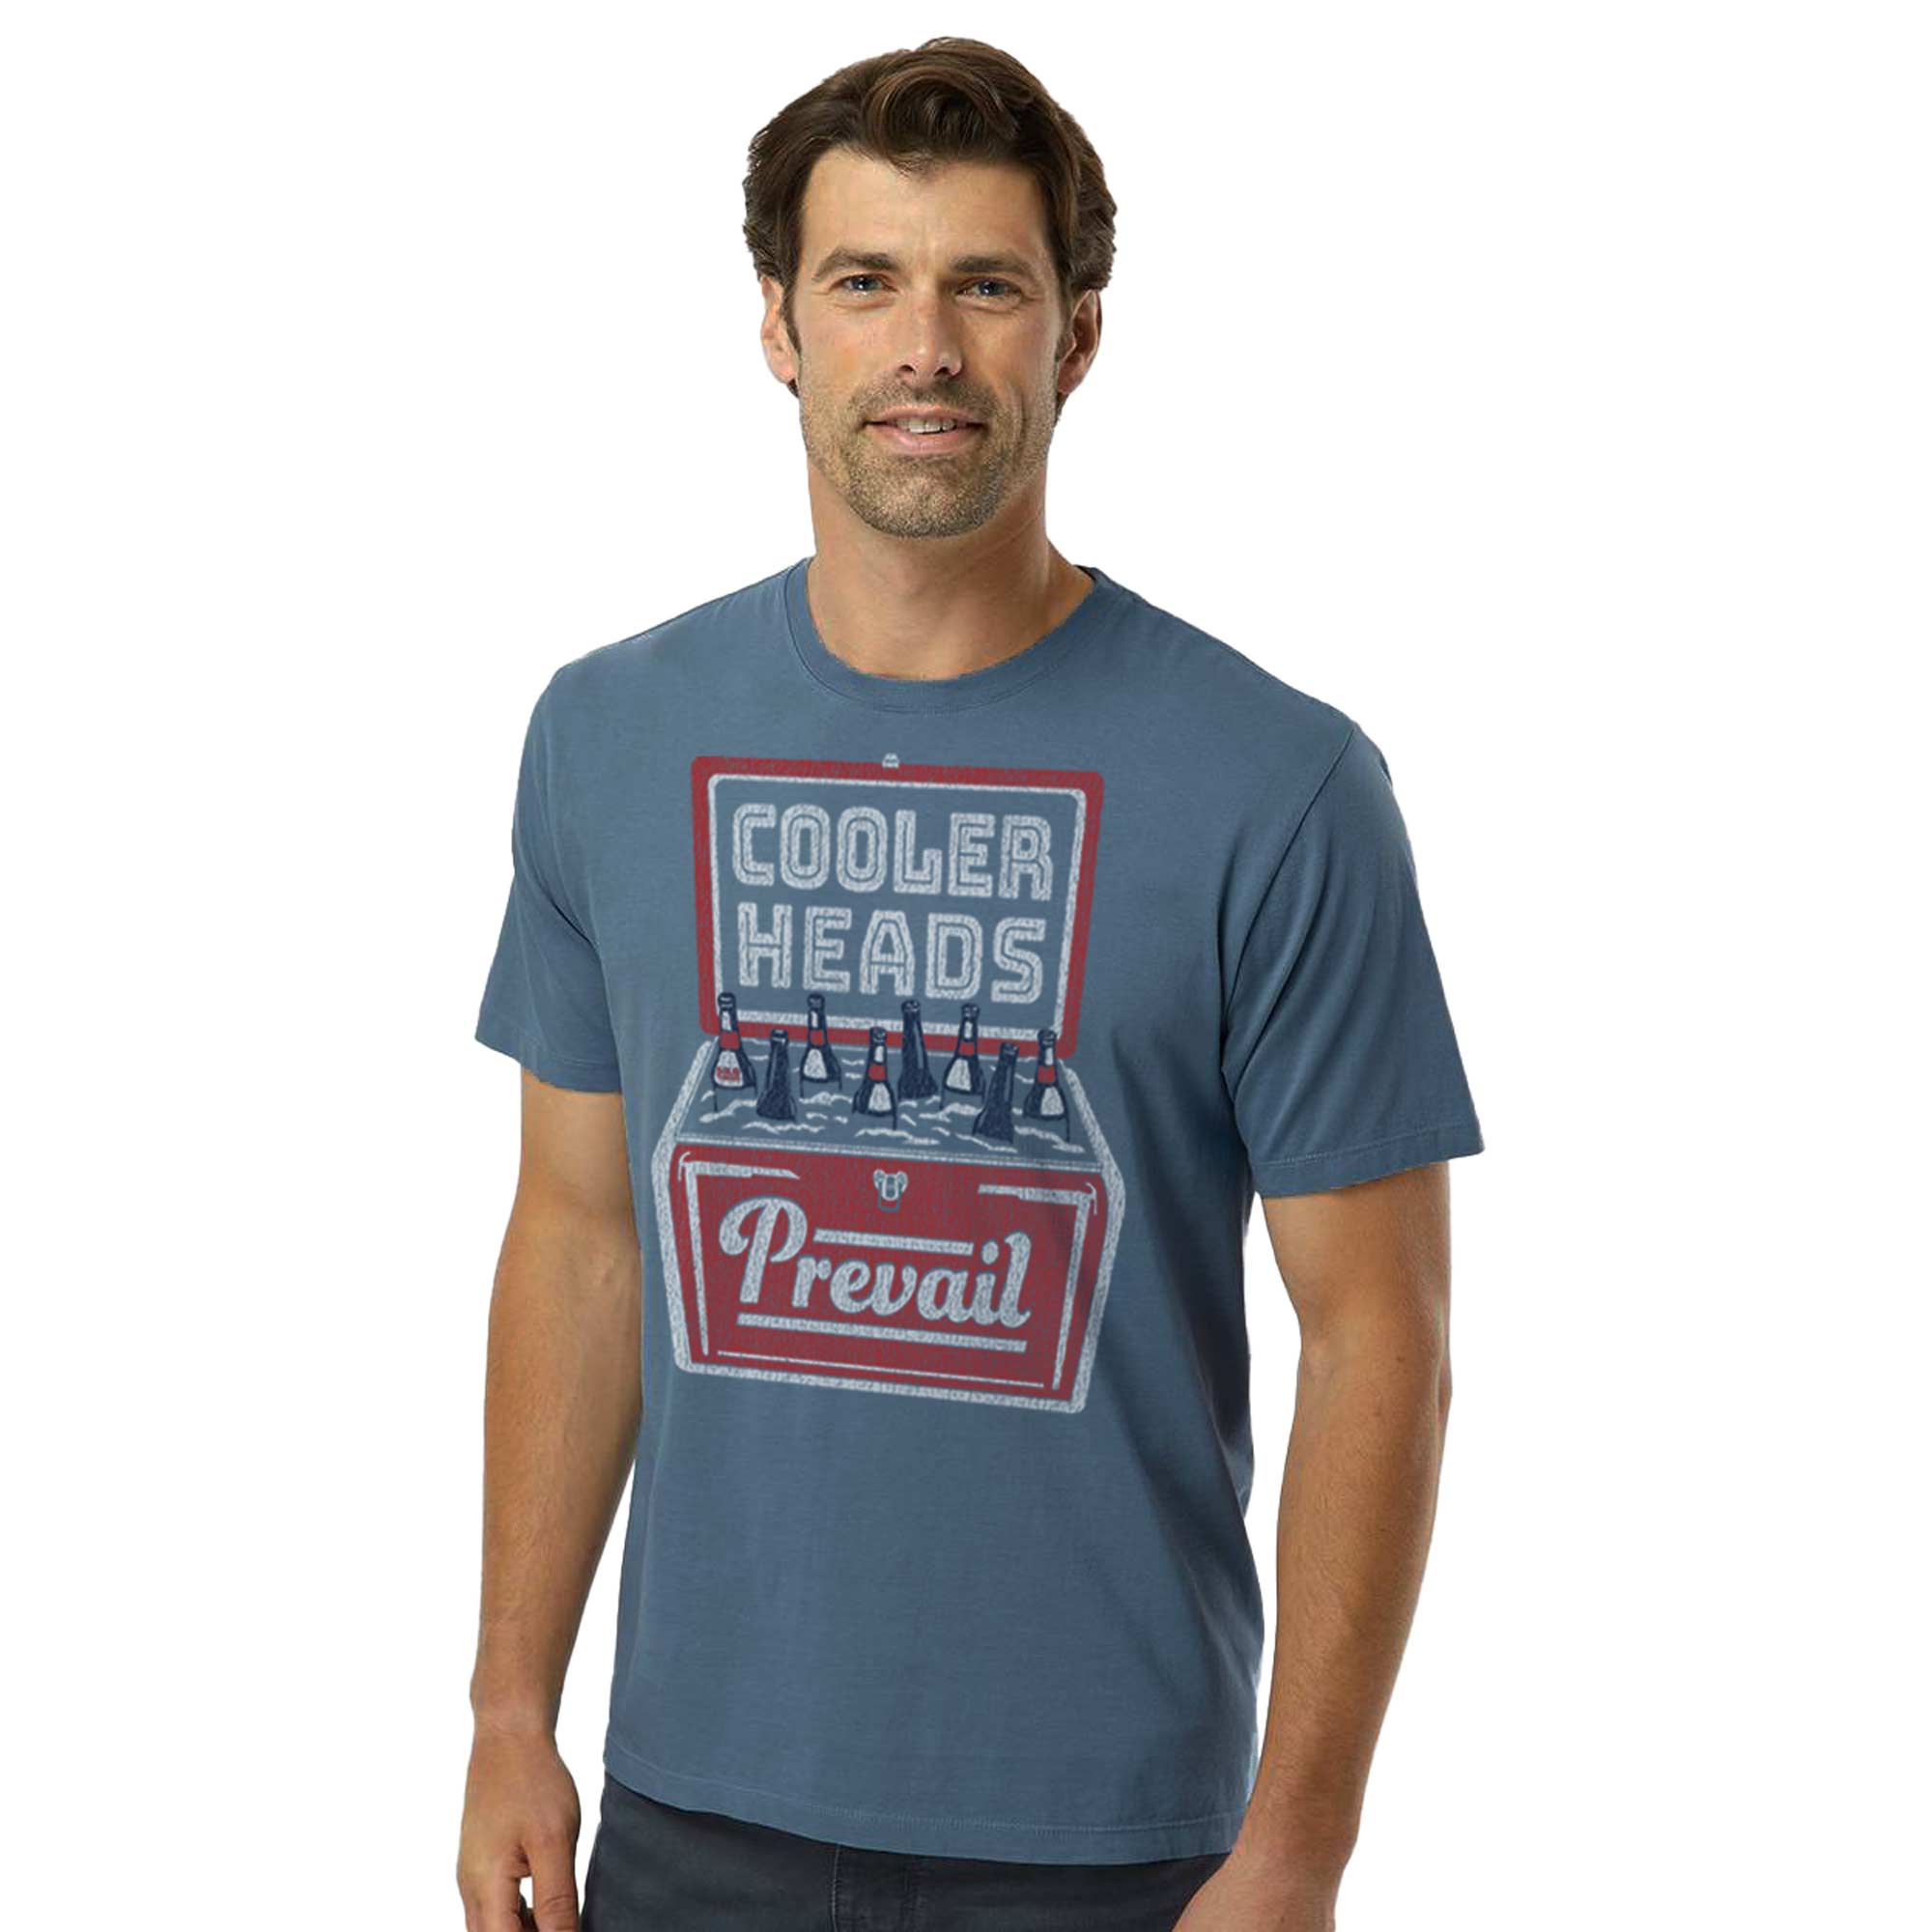 Cooler Heads Vintage Organic Cotton T-shirt | Funny Drinking   Tee On Model | Solid Threads